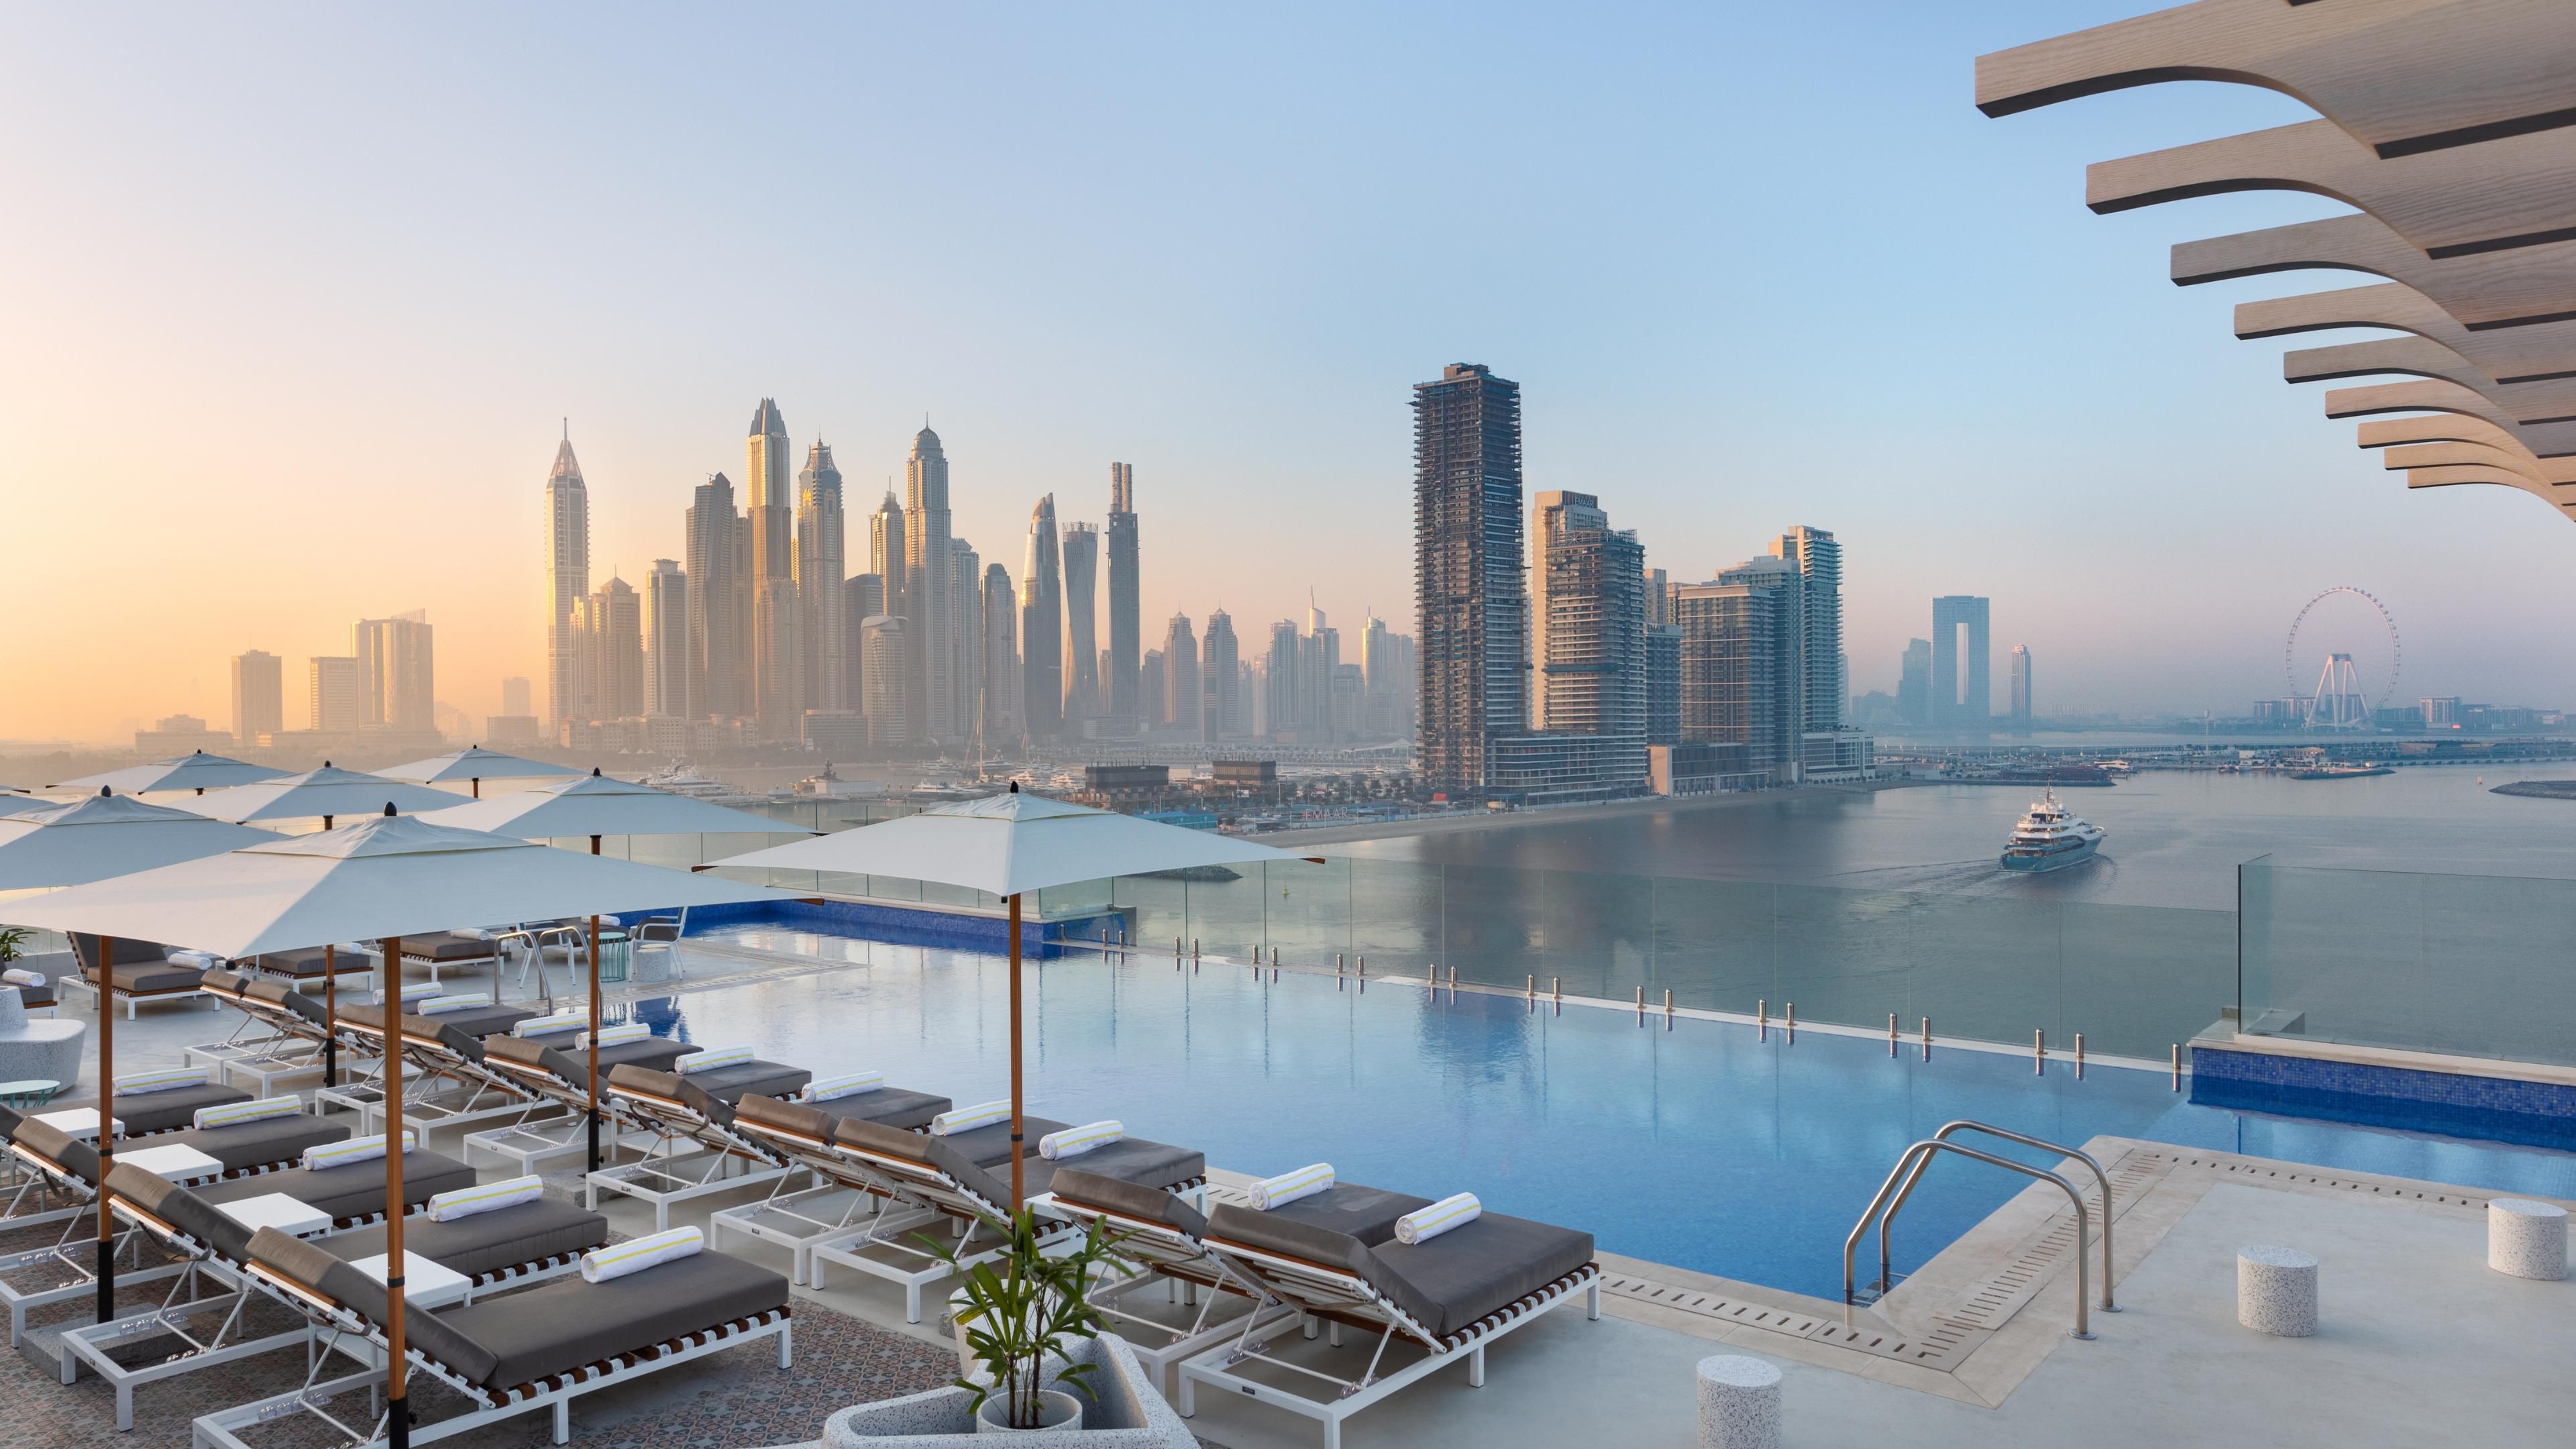 Take a dip in our rooftop pool and enjoy the skyline views